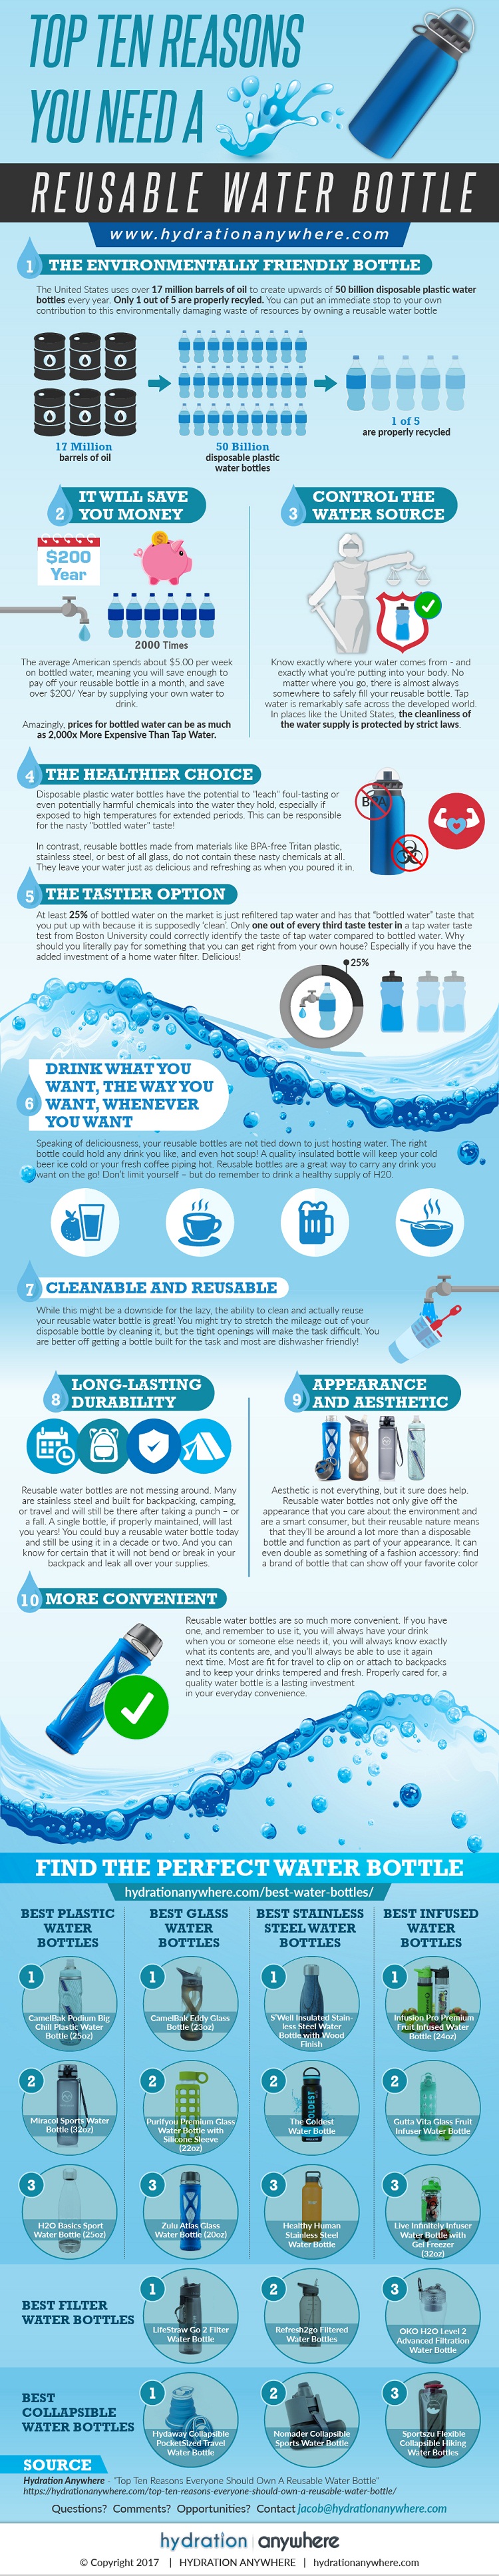 Top Ten Reasons You Need A Reusable Water Bottle Infographic FULL